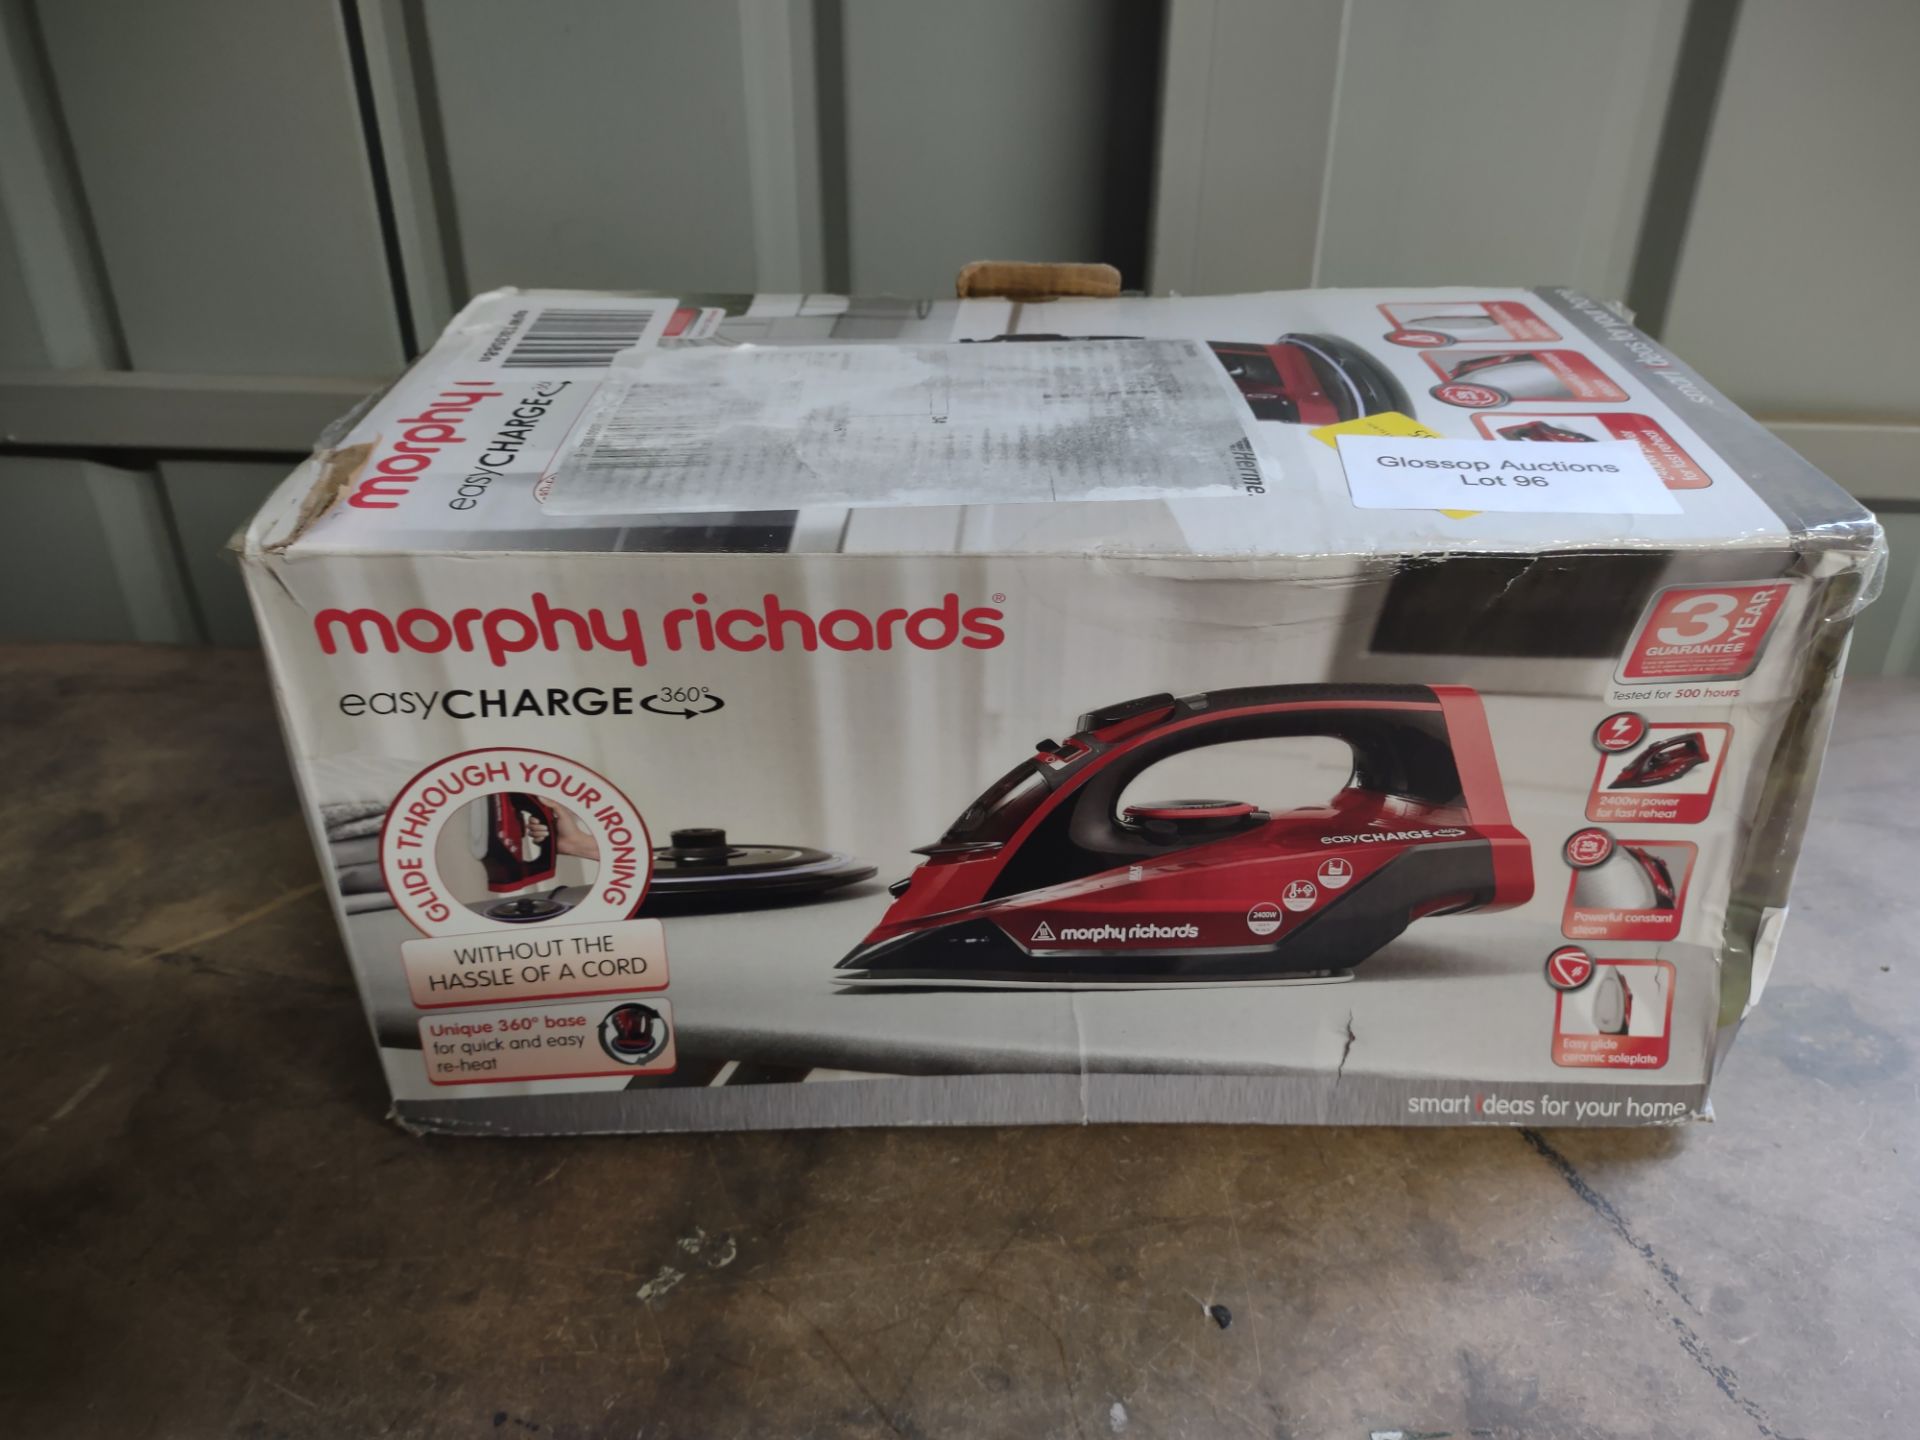 Morphy Richards 303250 Cordless Steam Iron easyCHARGE 360 Cord-Free. RRP £54.99 - GRADE U Morphy